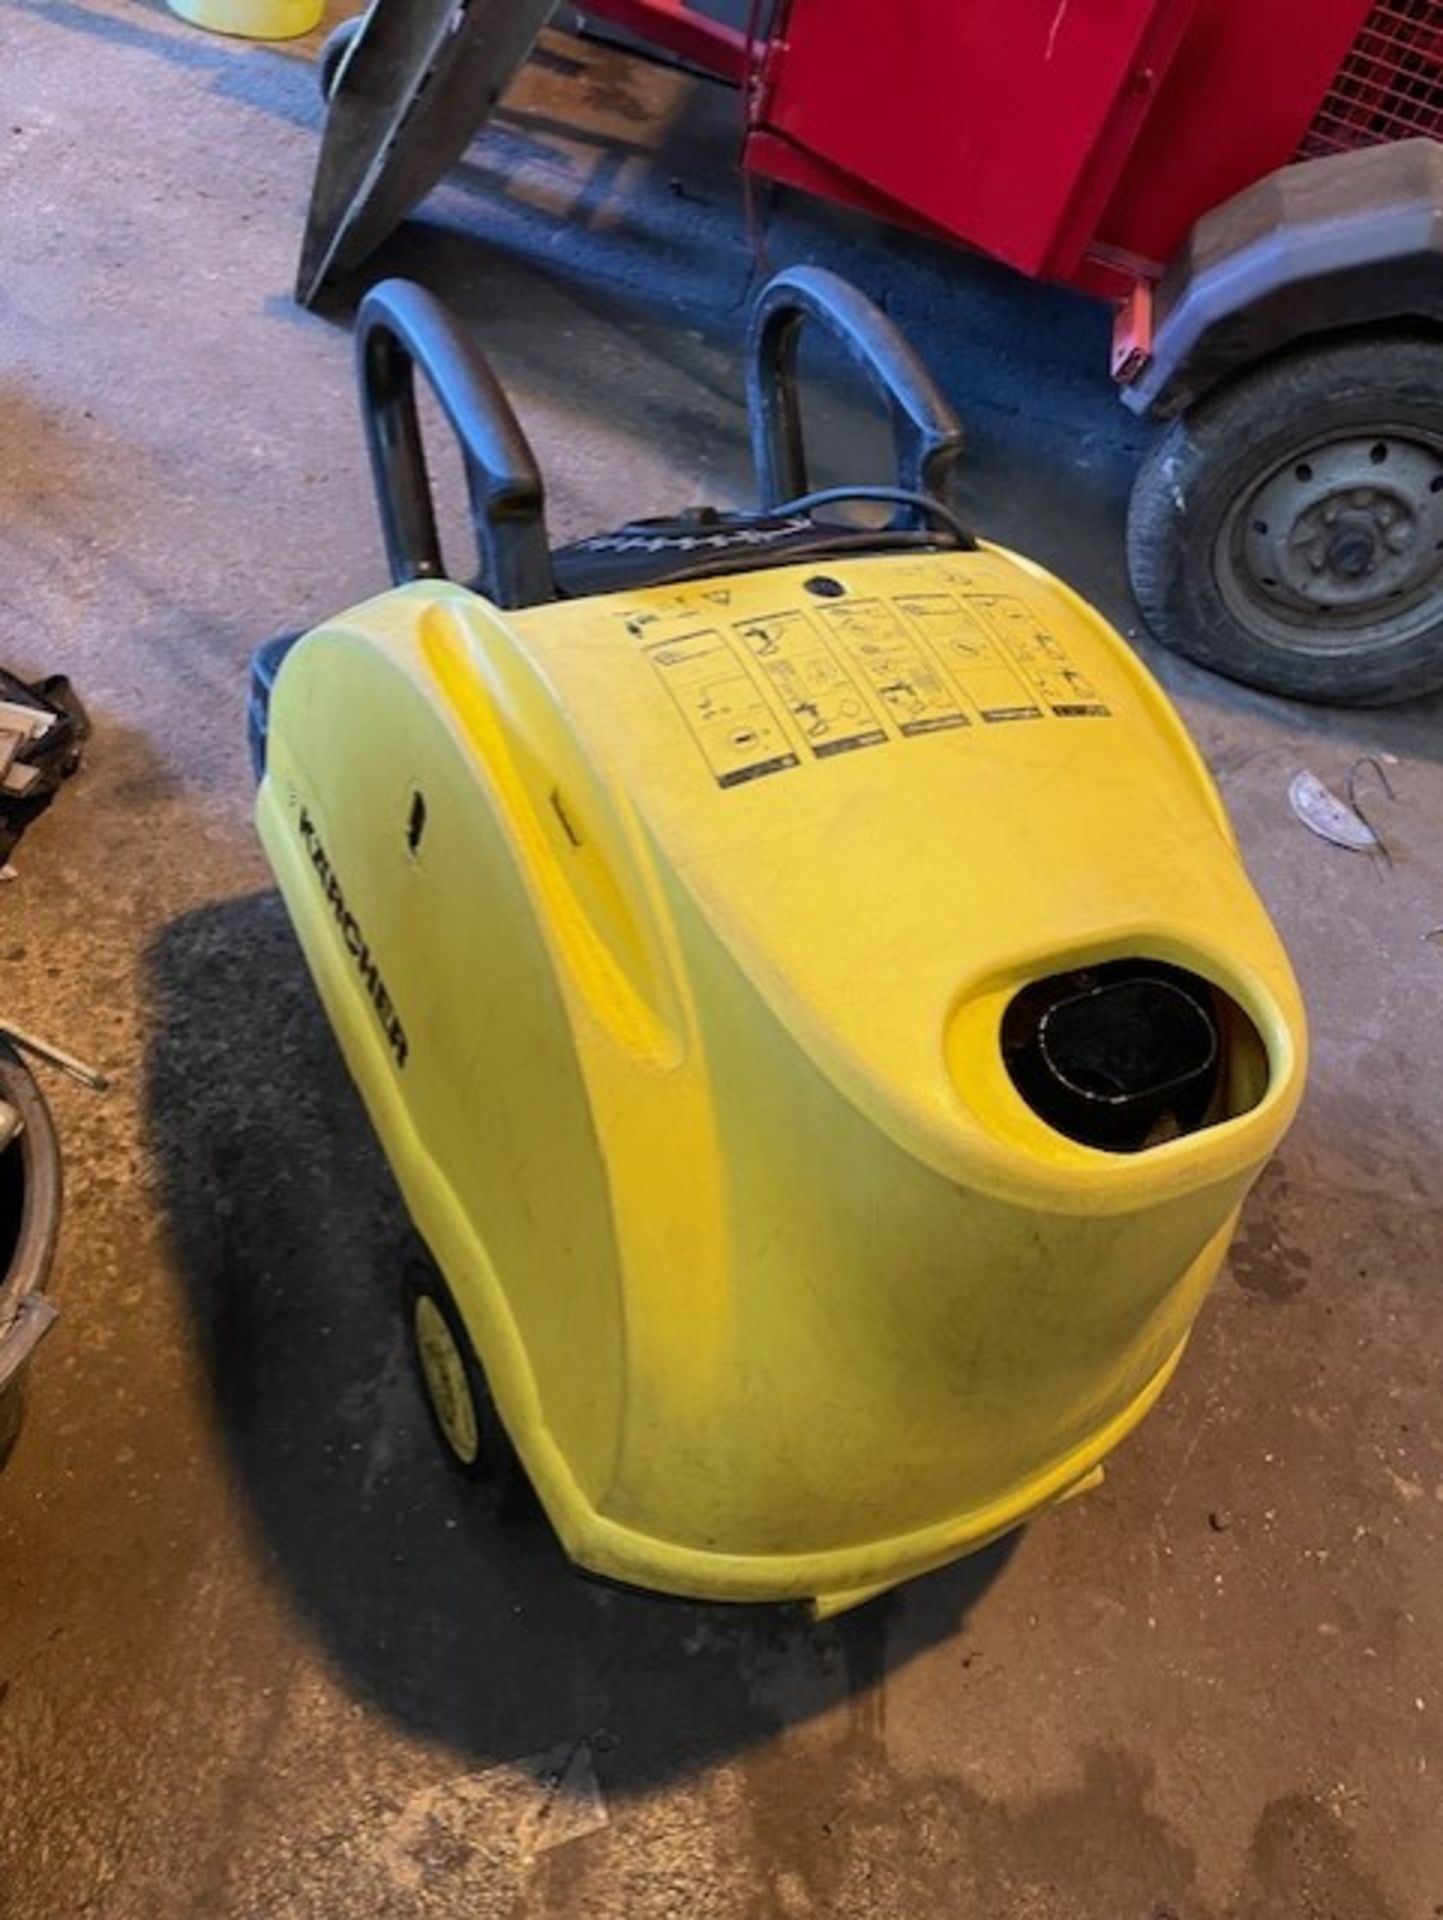 Karcher hot and cold pressure washer hds551 c model it’s in good condition still comes with hose and - Image 6 of 10